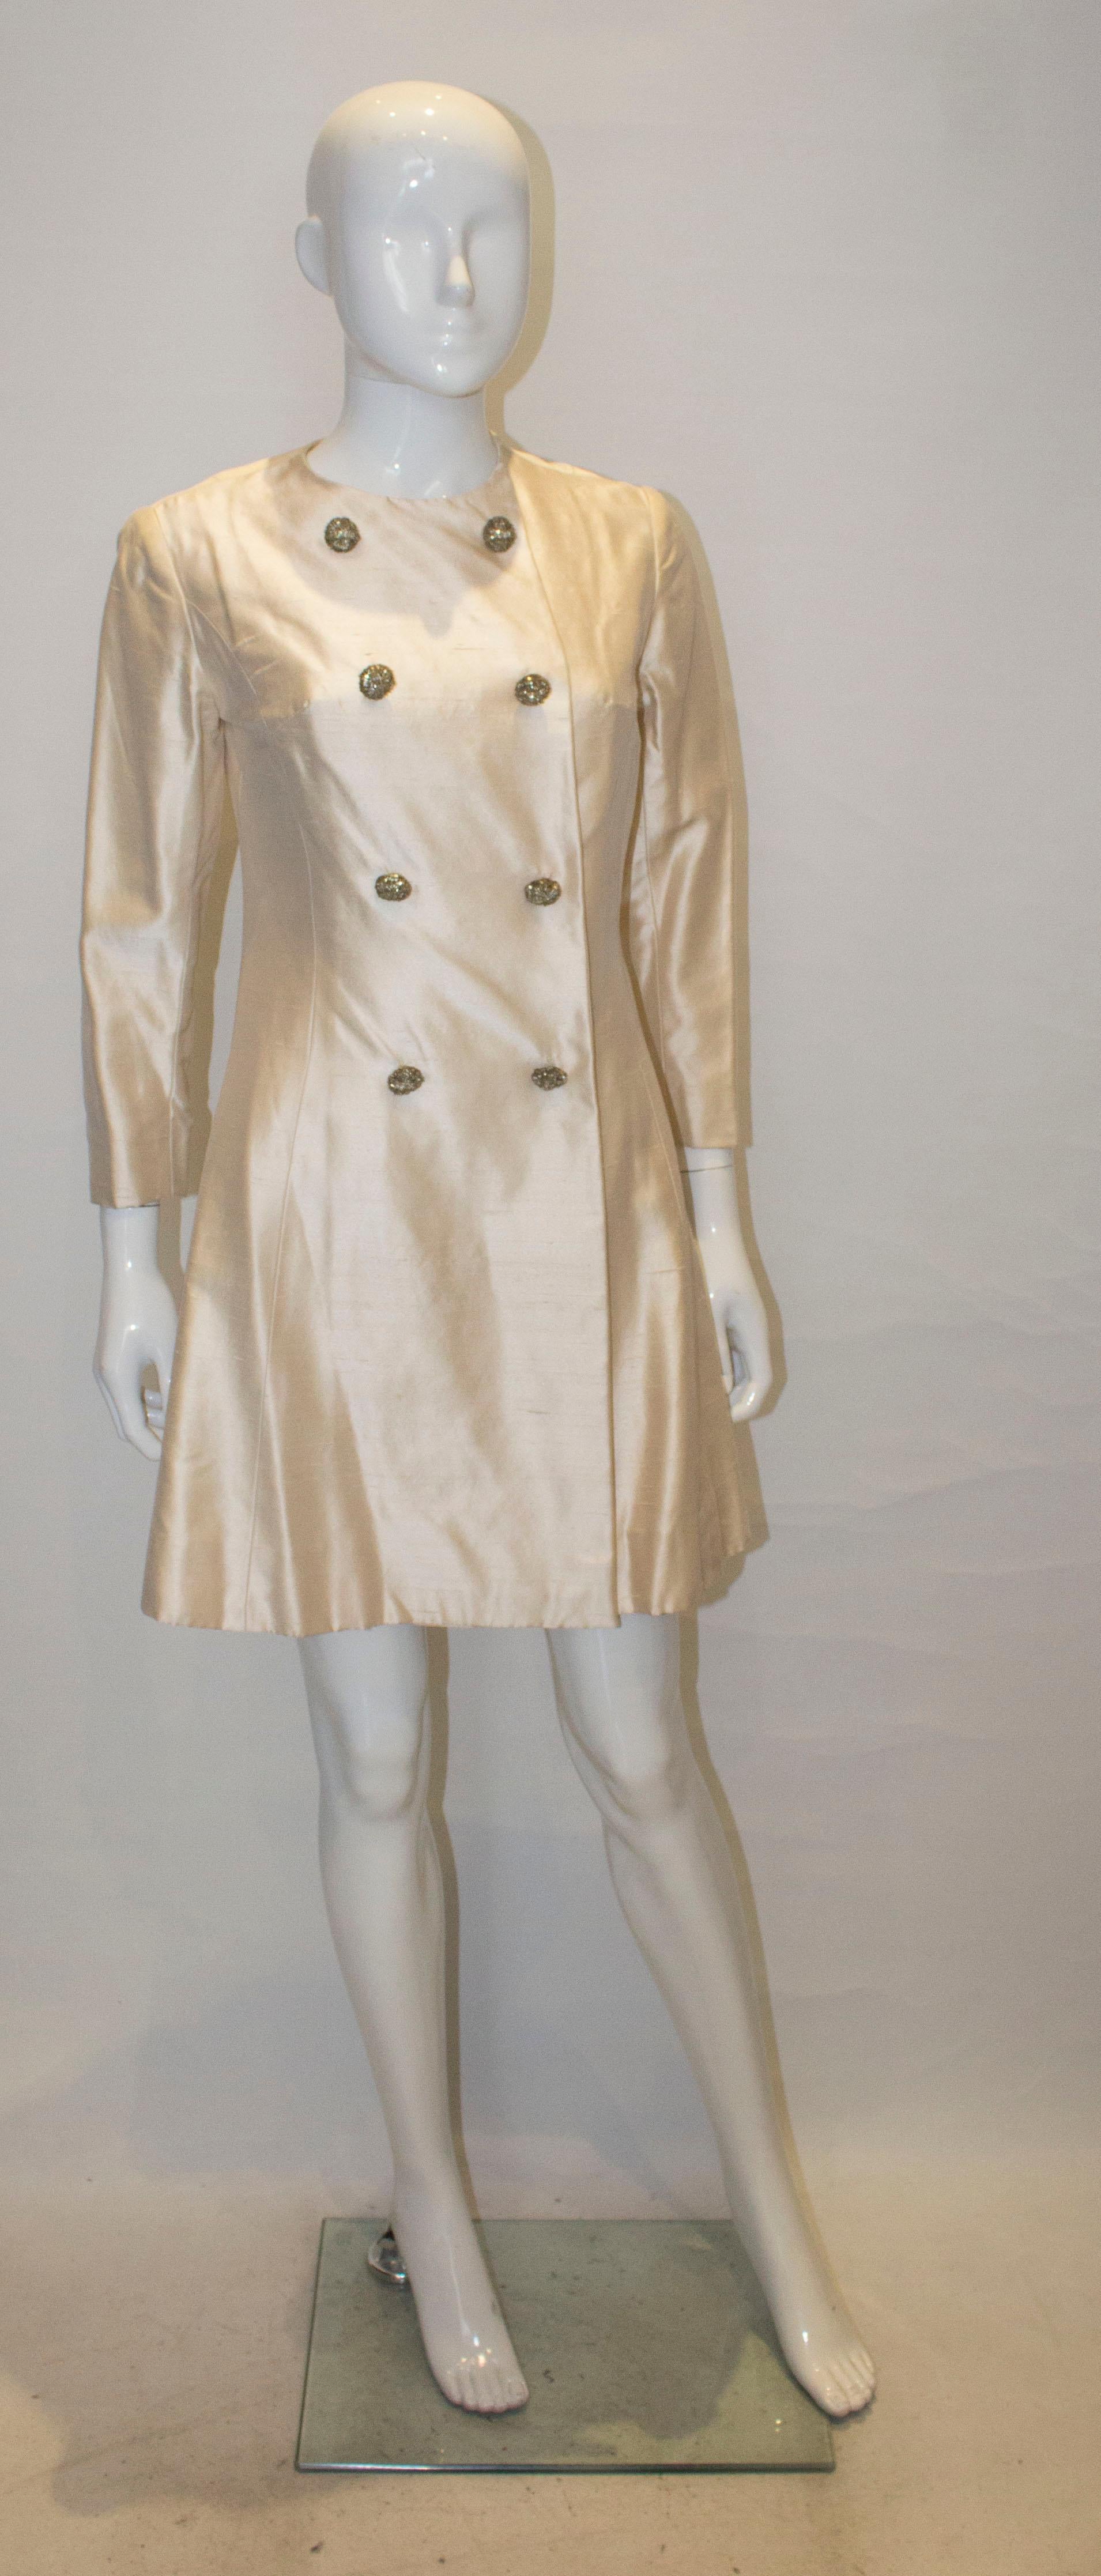 A chic vintage coat dress in raw silk. The dress has a round neckline, popper front fastenings with eight decorative buttons and is fully lined.